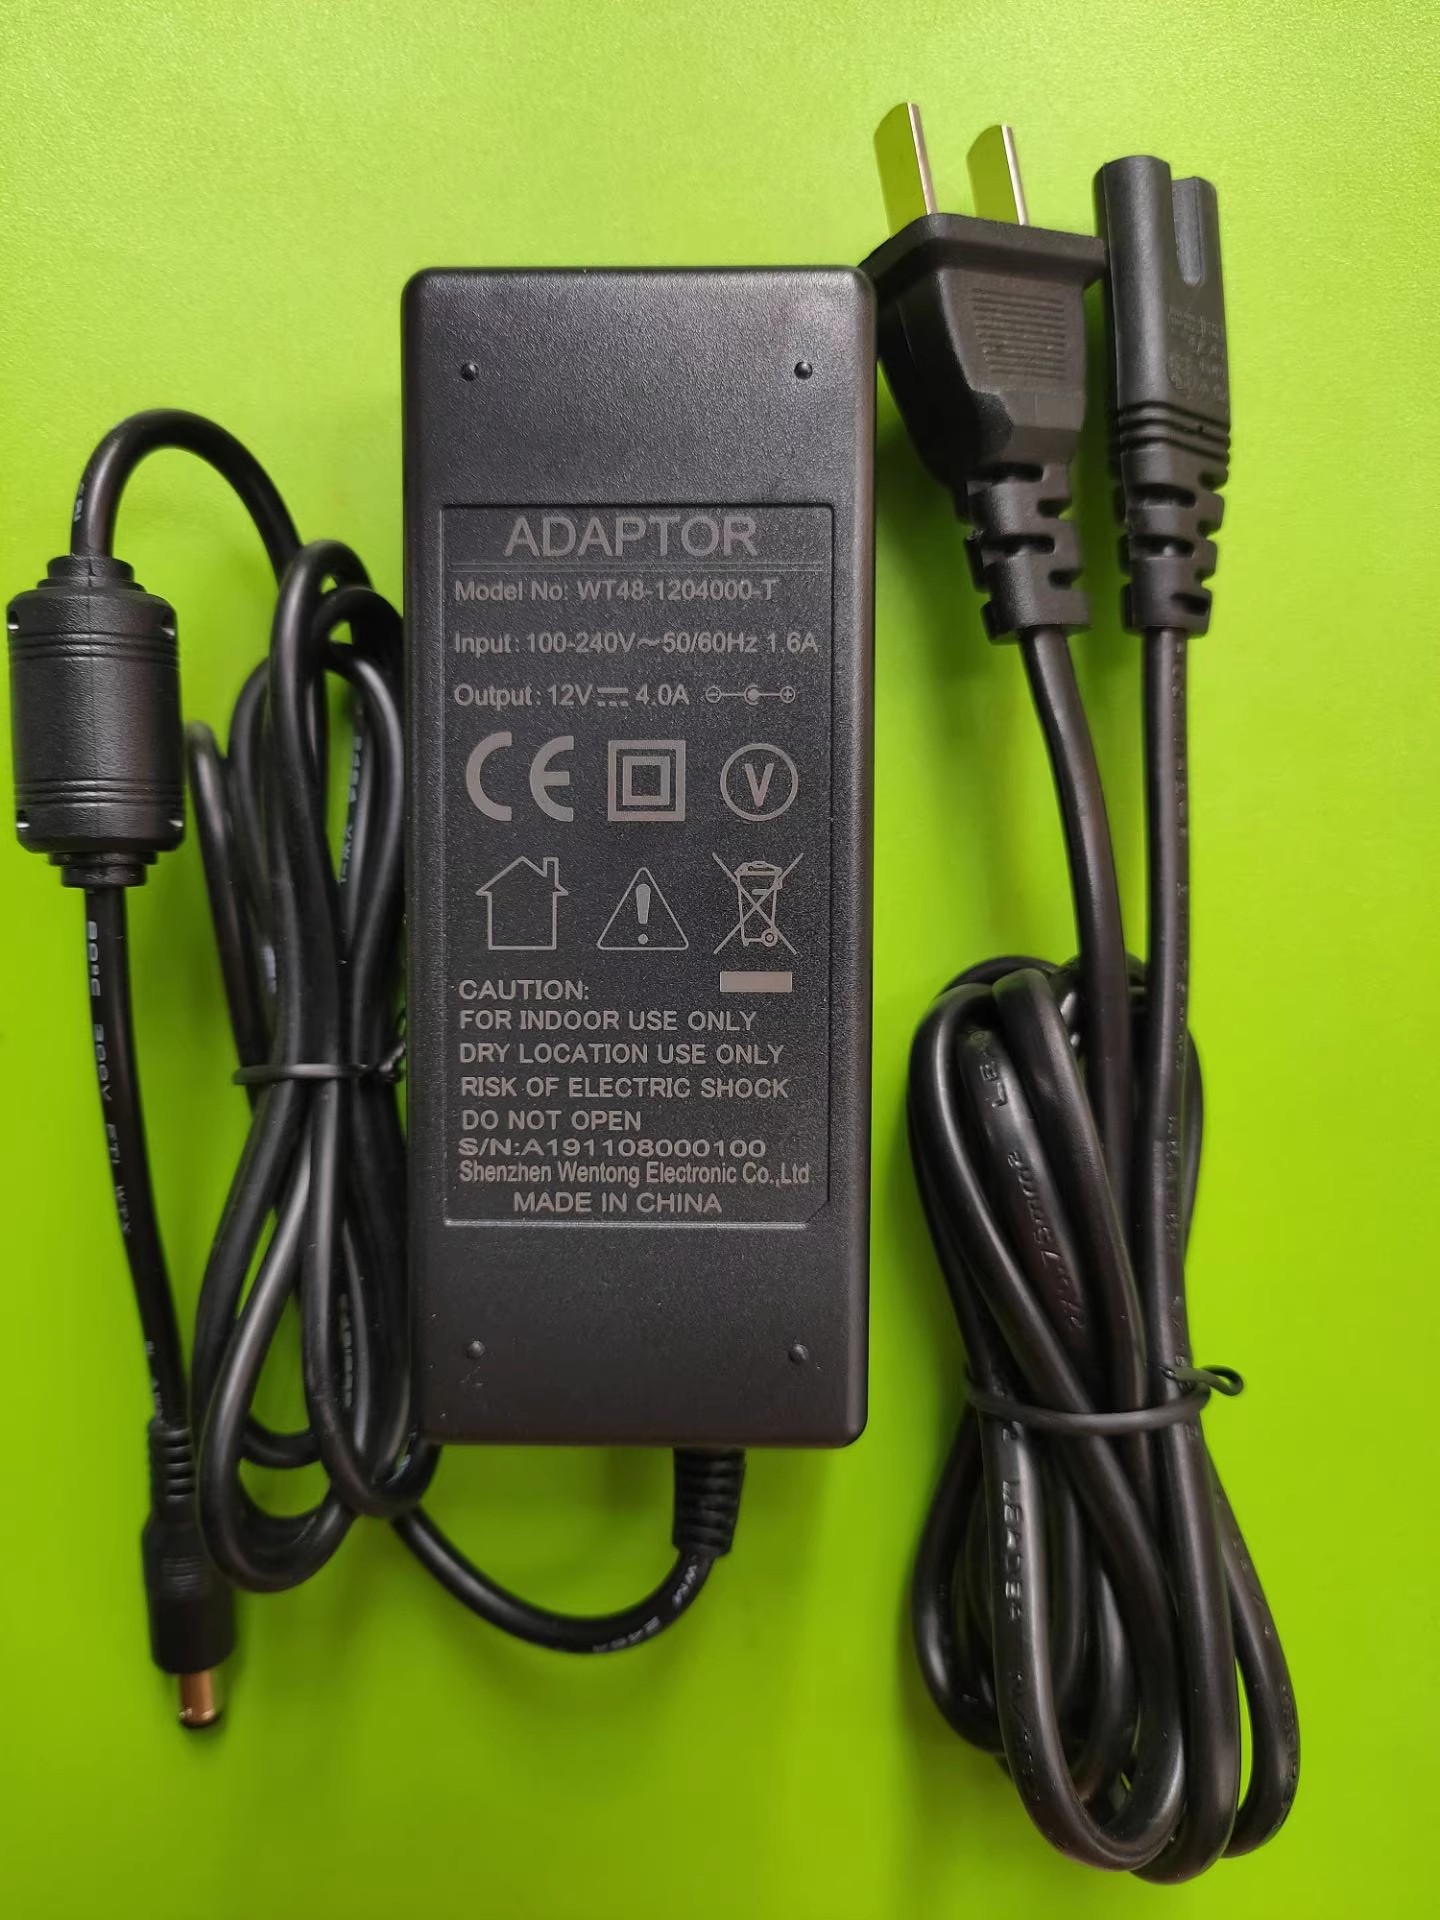 *Brand NEW*ADAPTOR 12V 4A AC DC ADAPTHE WT48-1204000-T POWER Supply